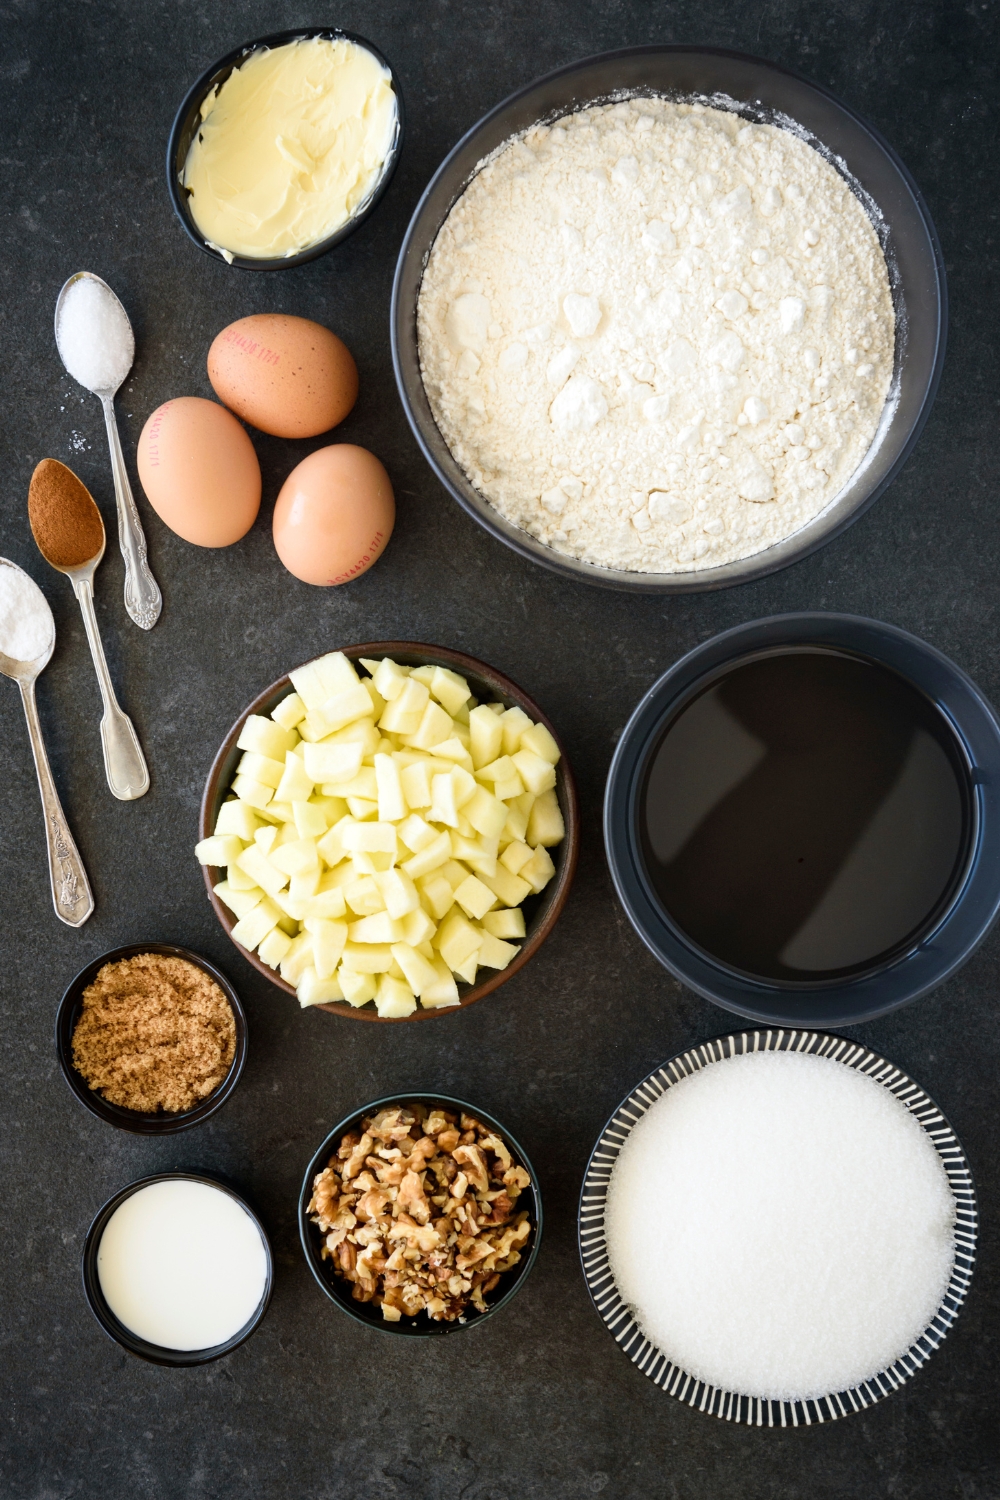 An assortment of ingredients including bowls of flour, butter, diced apples, chopped nuts, sugar, three eggs, and three spoonfuls of spices, all on a black countertop.